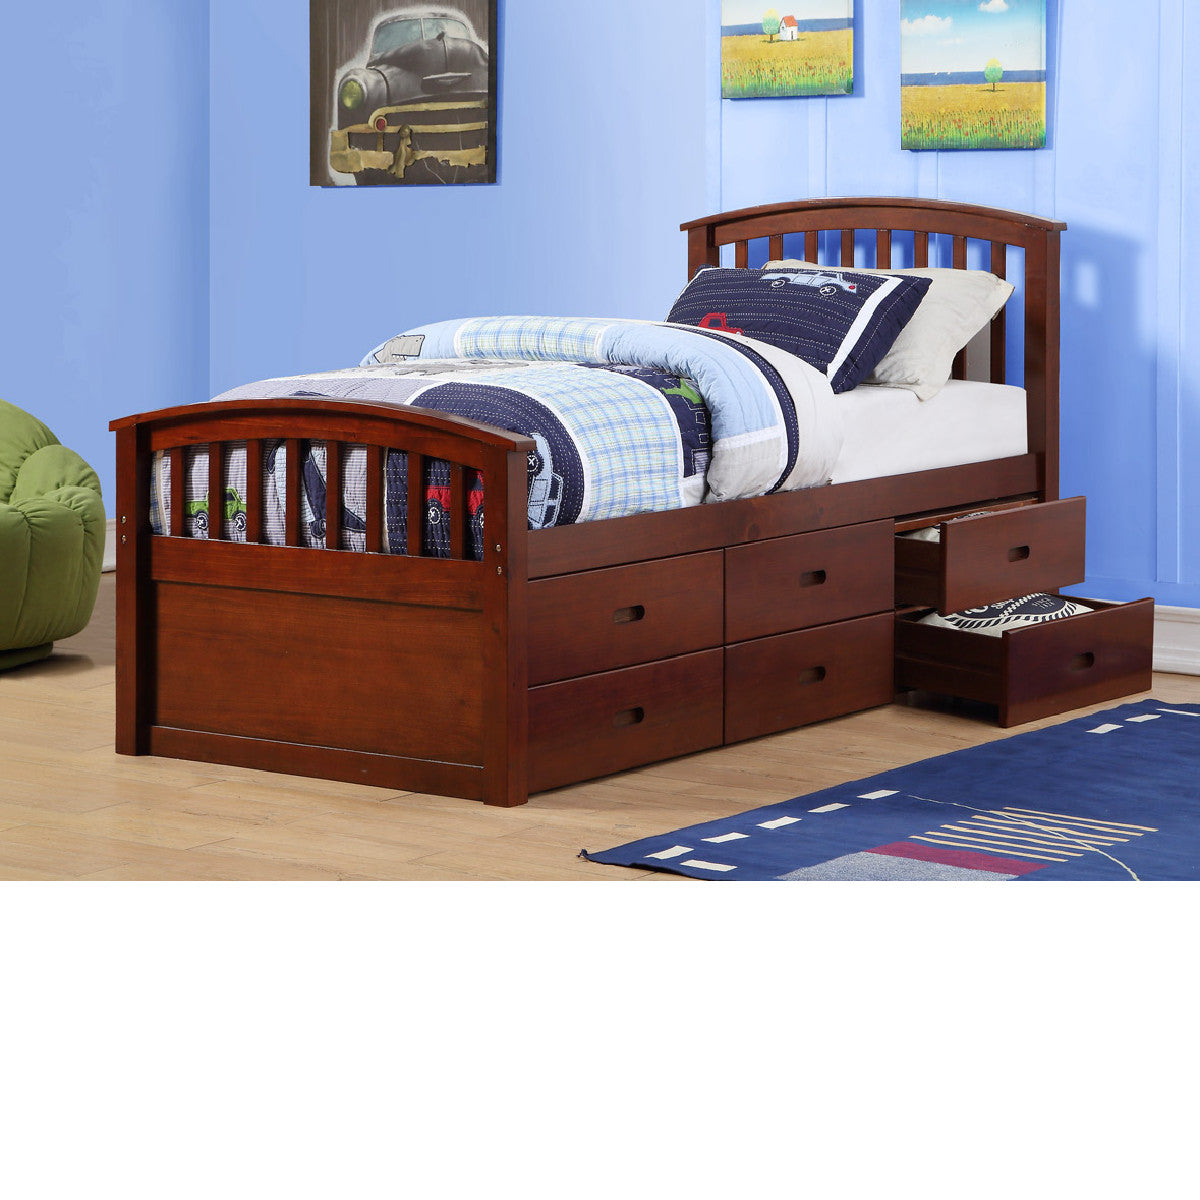 TWIN 6 DRAWER CAPTAINS BED CAPPUCCINO